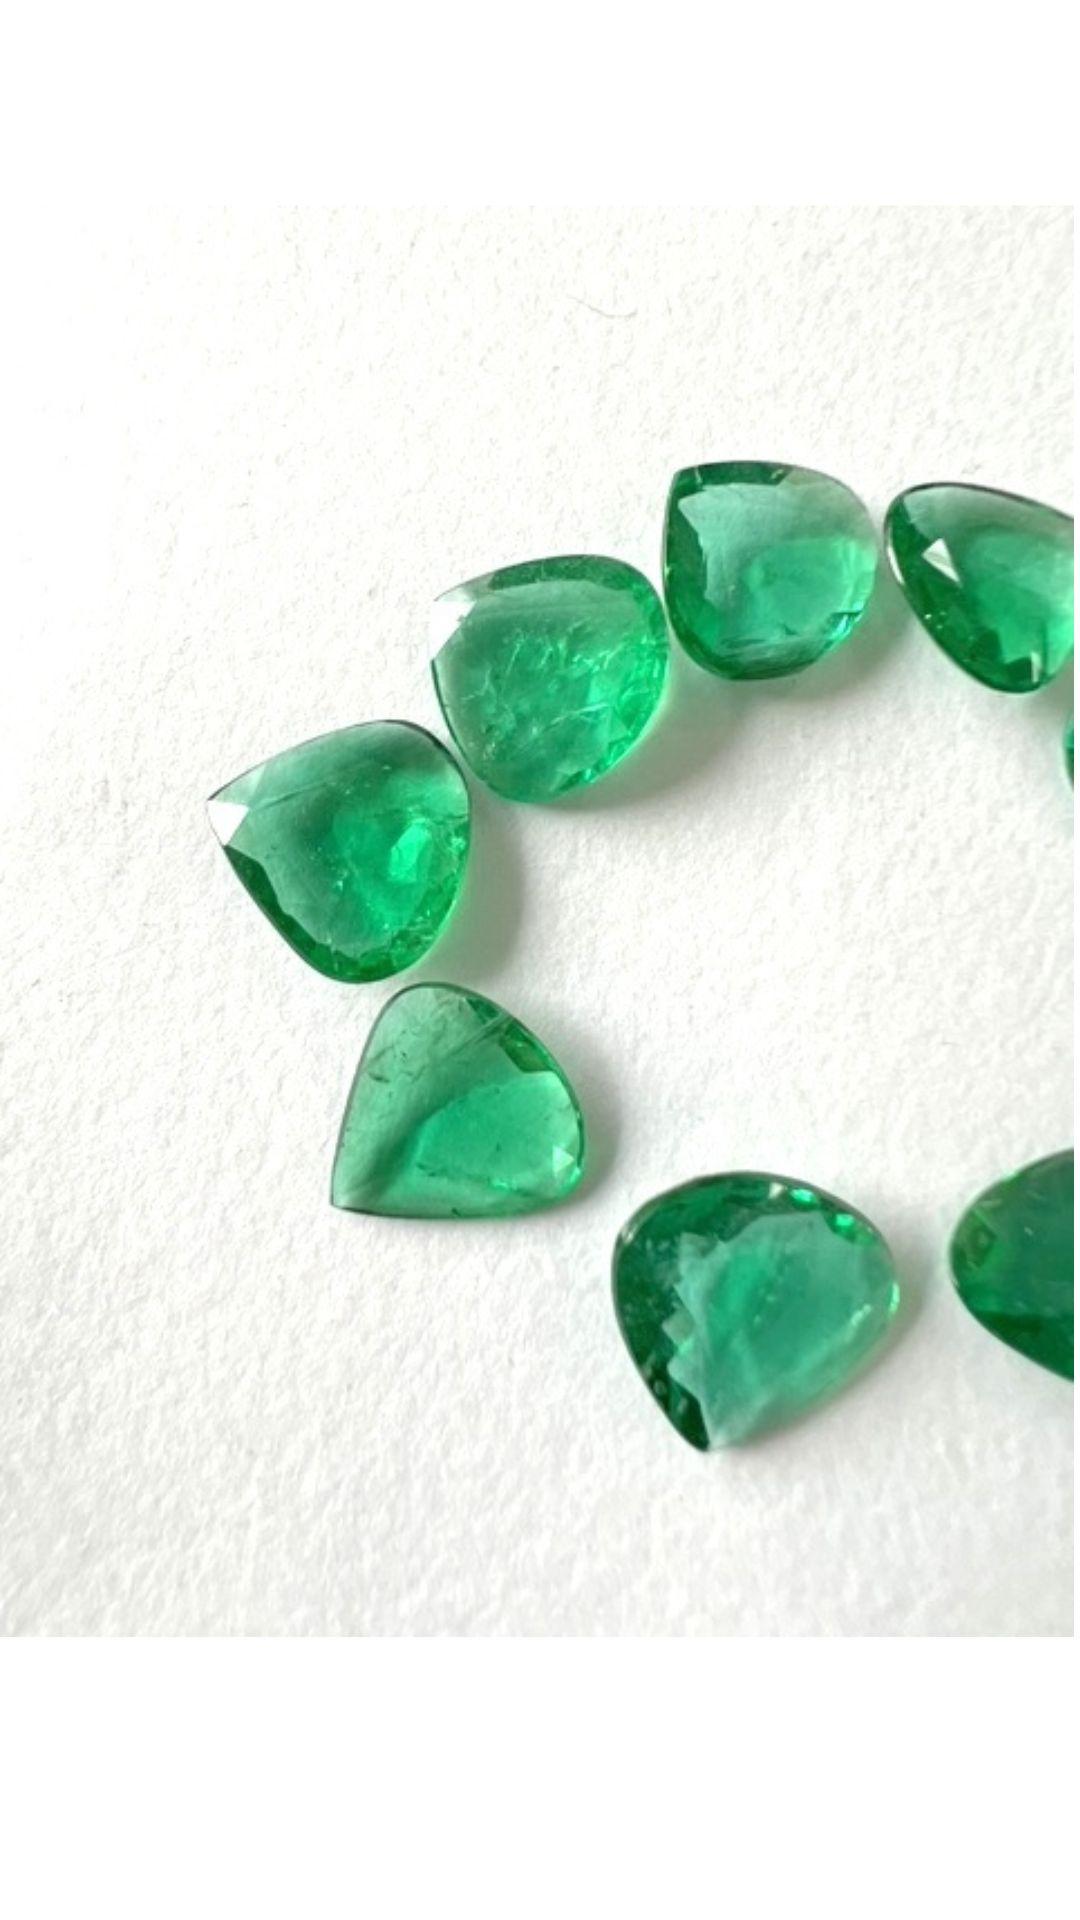 Heart Cut Zambian Emerald Heart Layout Suite Faceted Cut stone Loose Gemstone for Jewelry